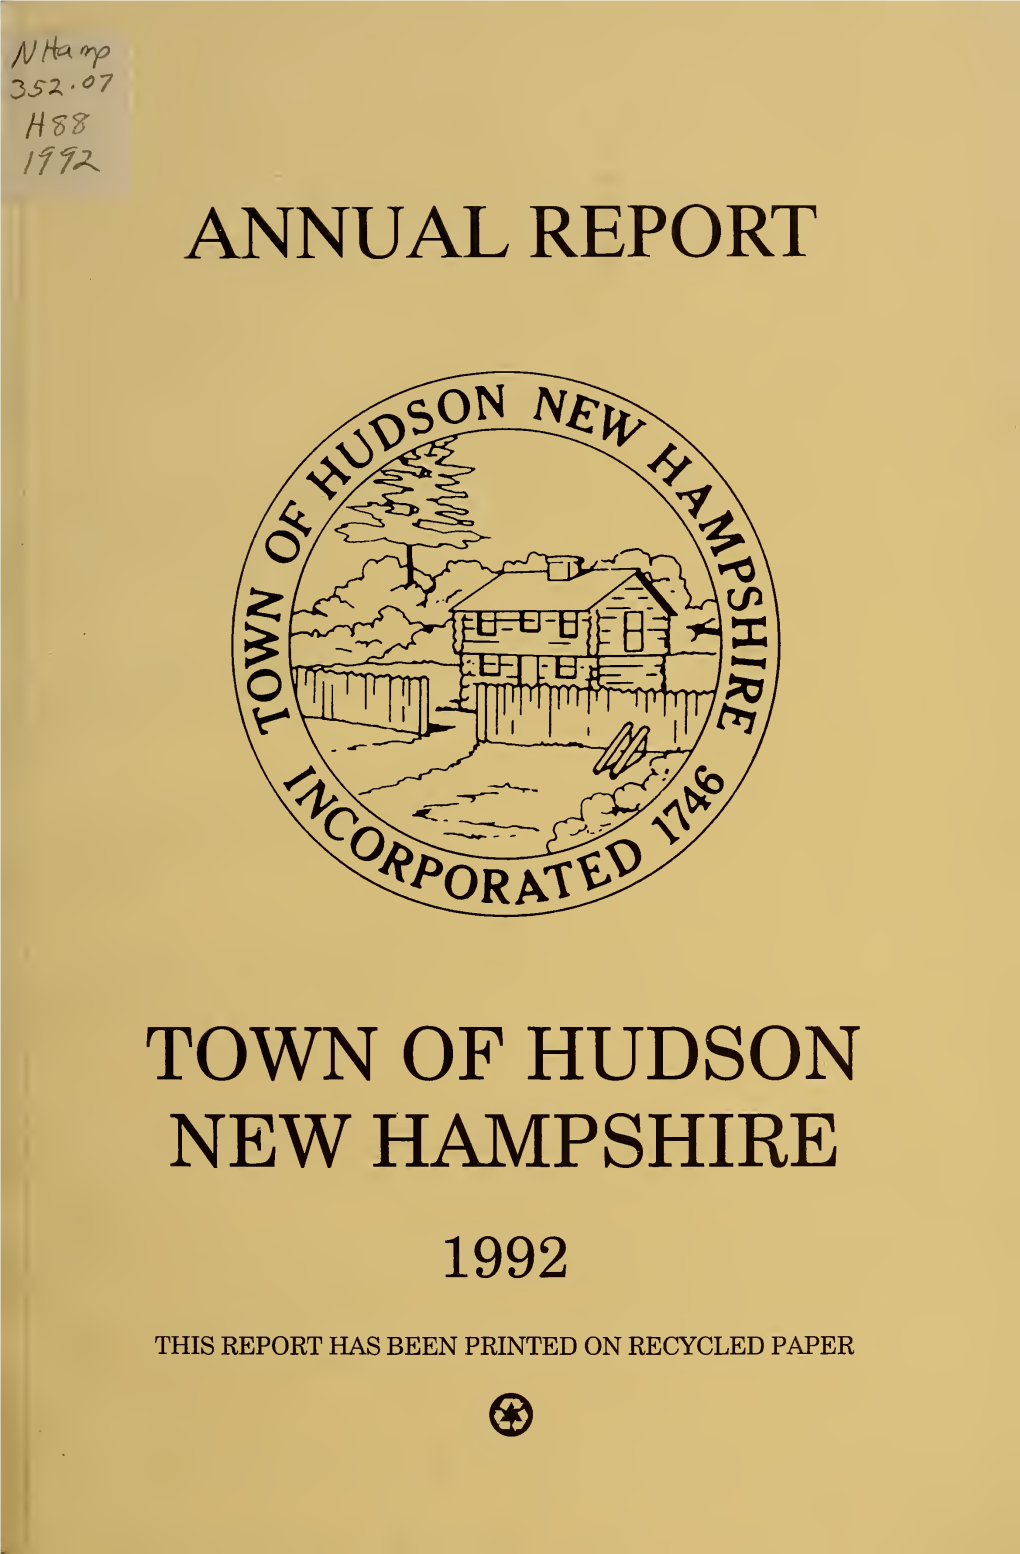 Annual Reports of the Town of Hudson. Hudson